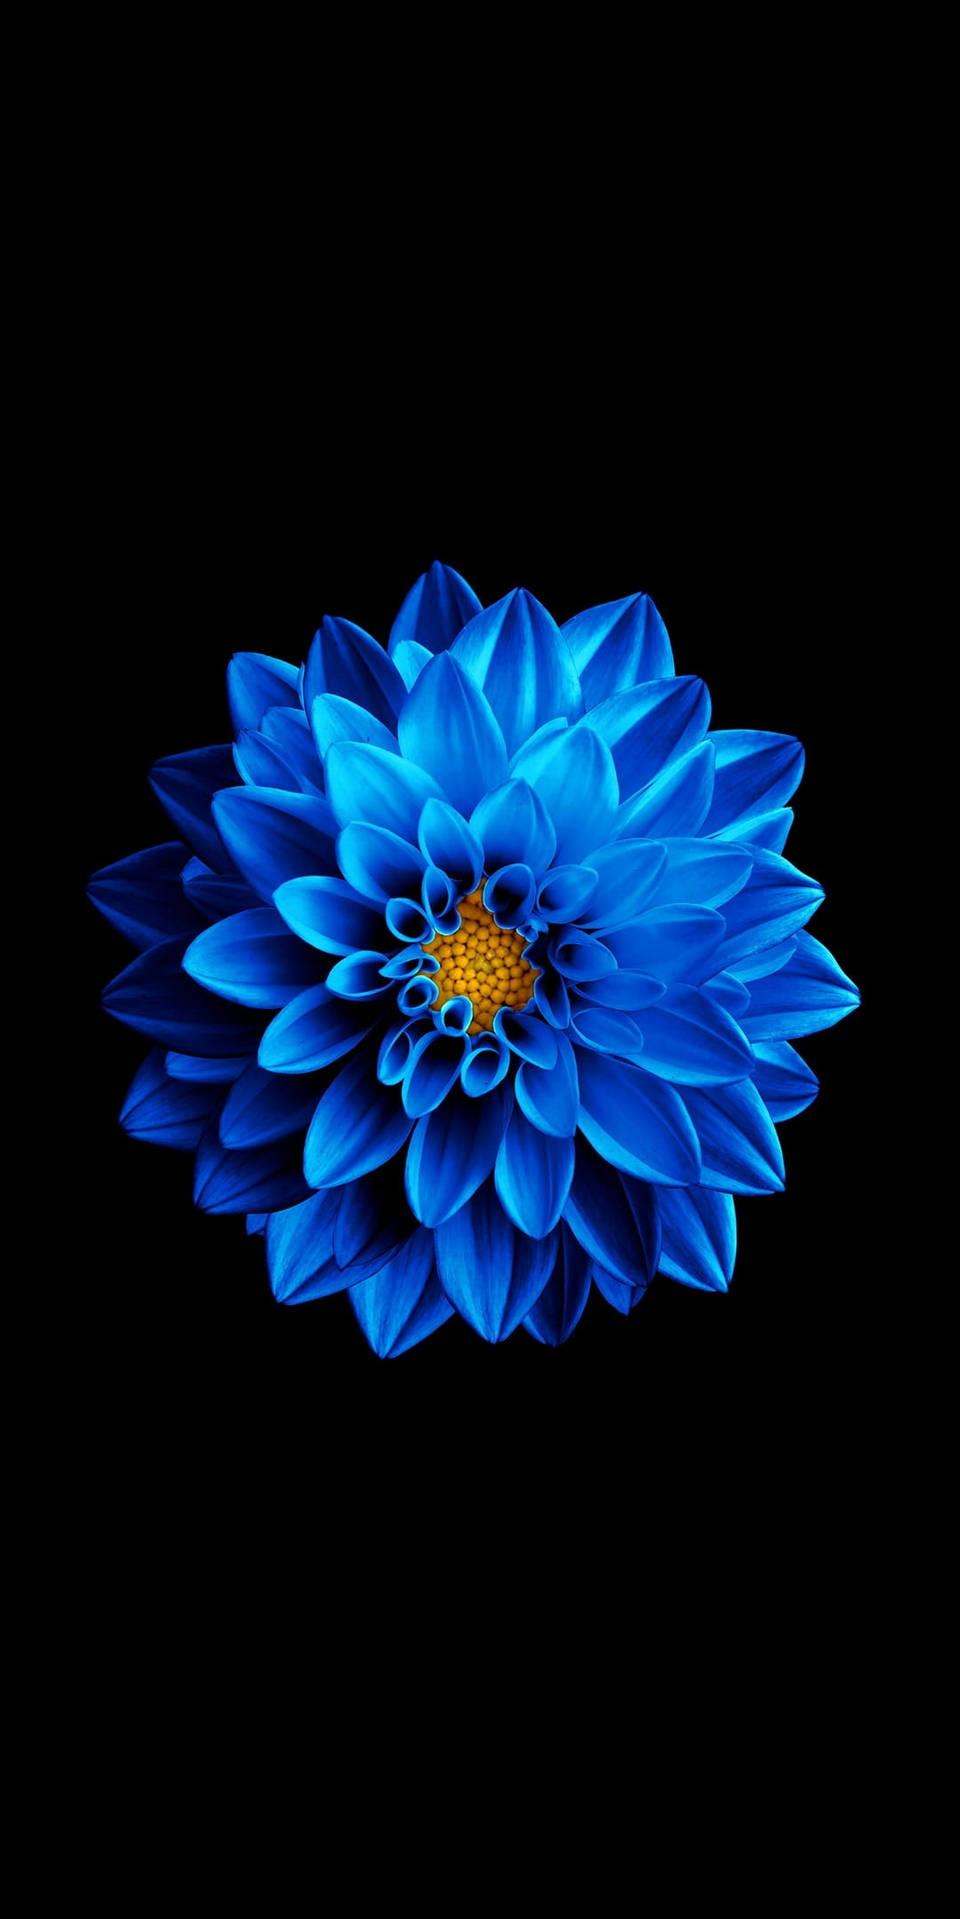 Amoled Android Blue Flower Wallpaper